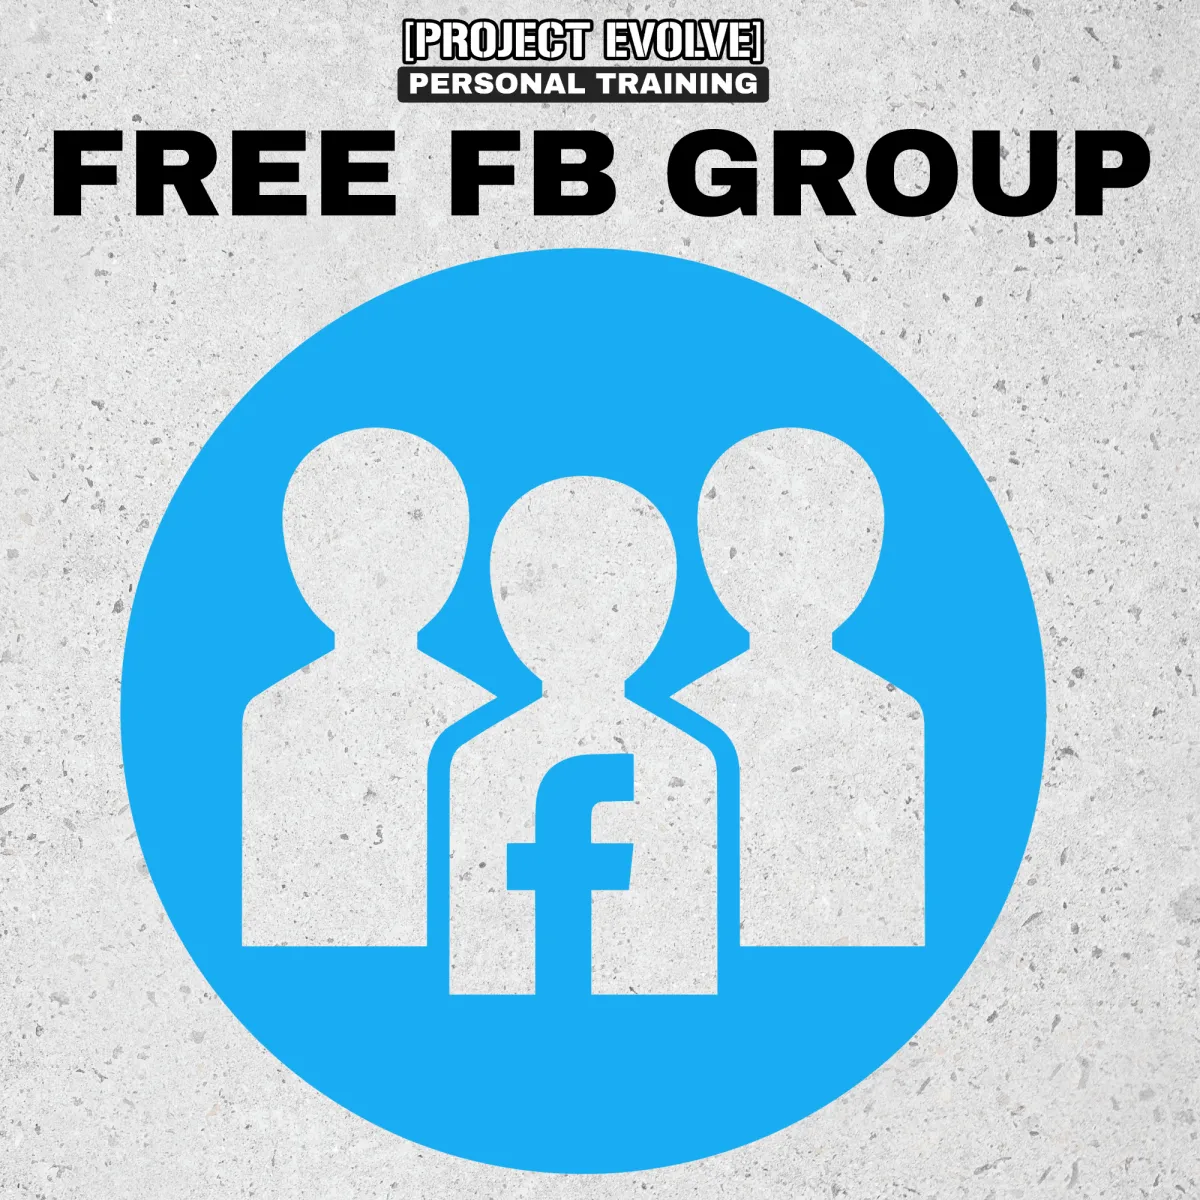 Free FB Group by Project Evolve Personal Training gym